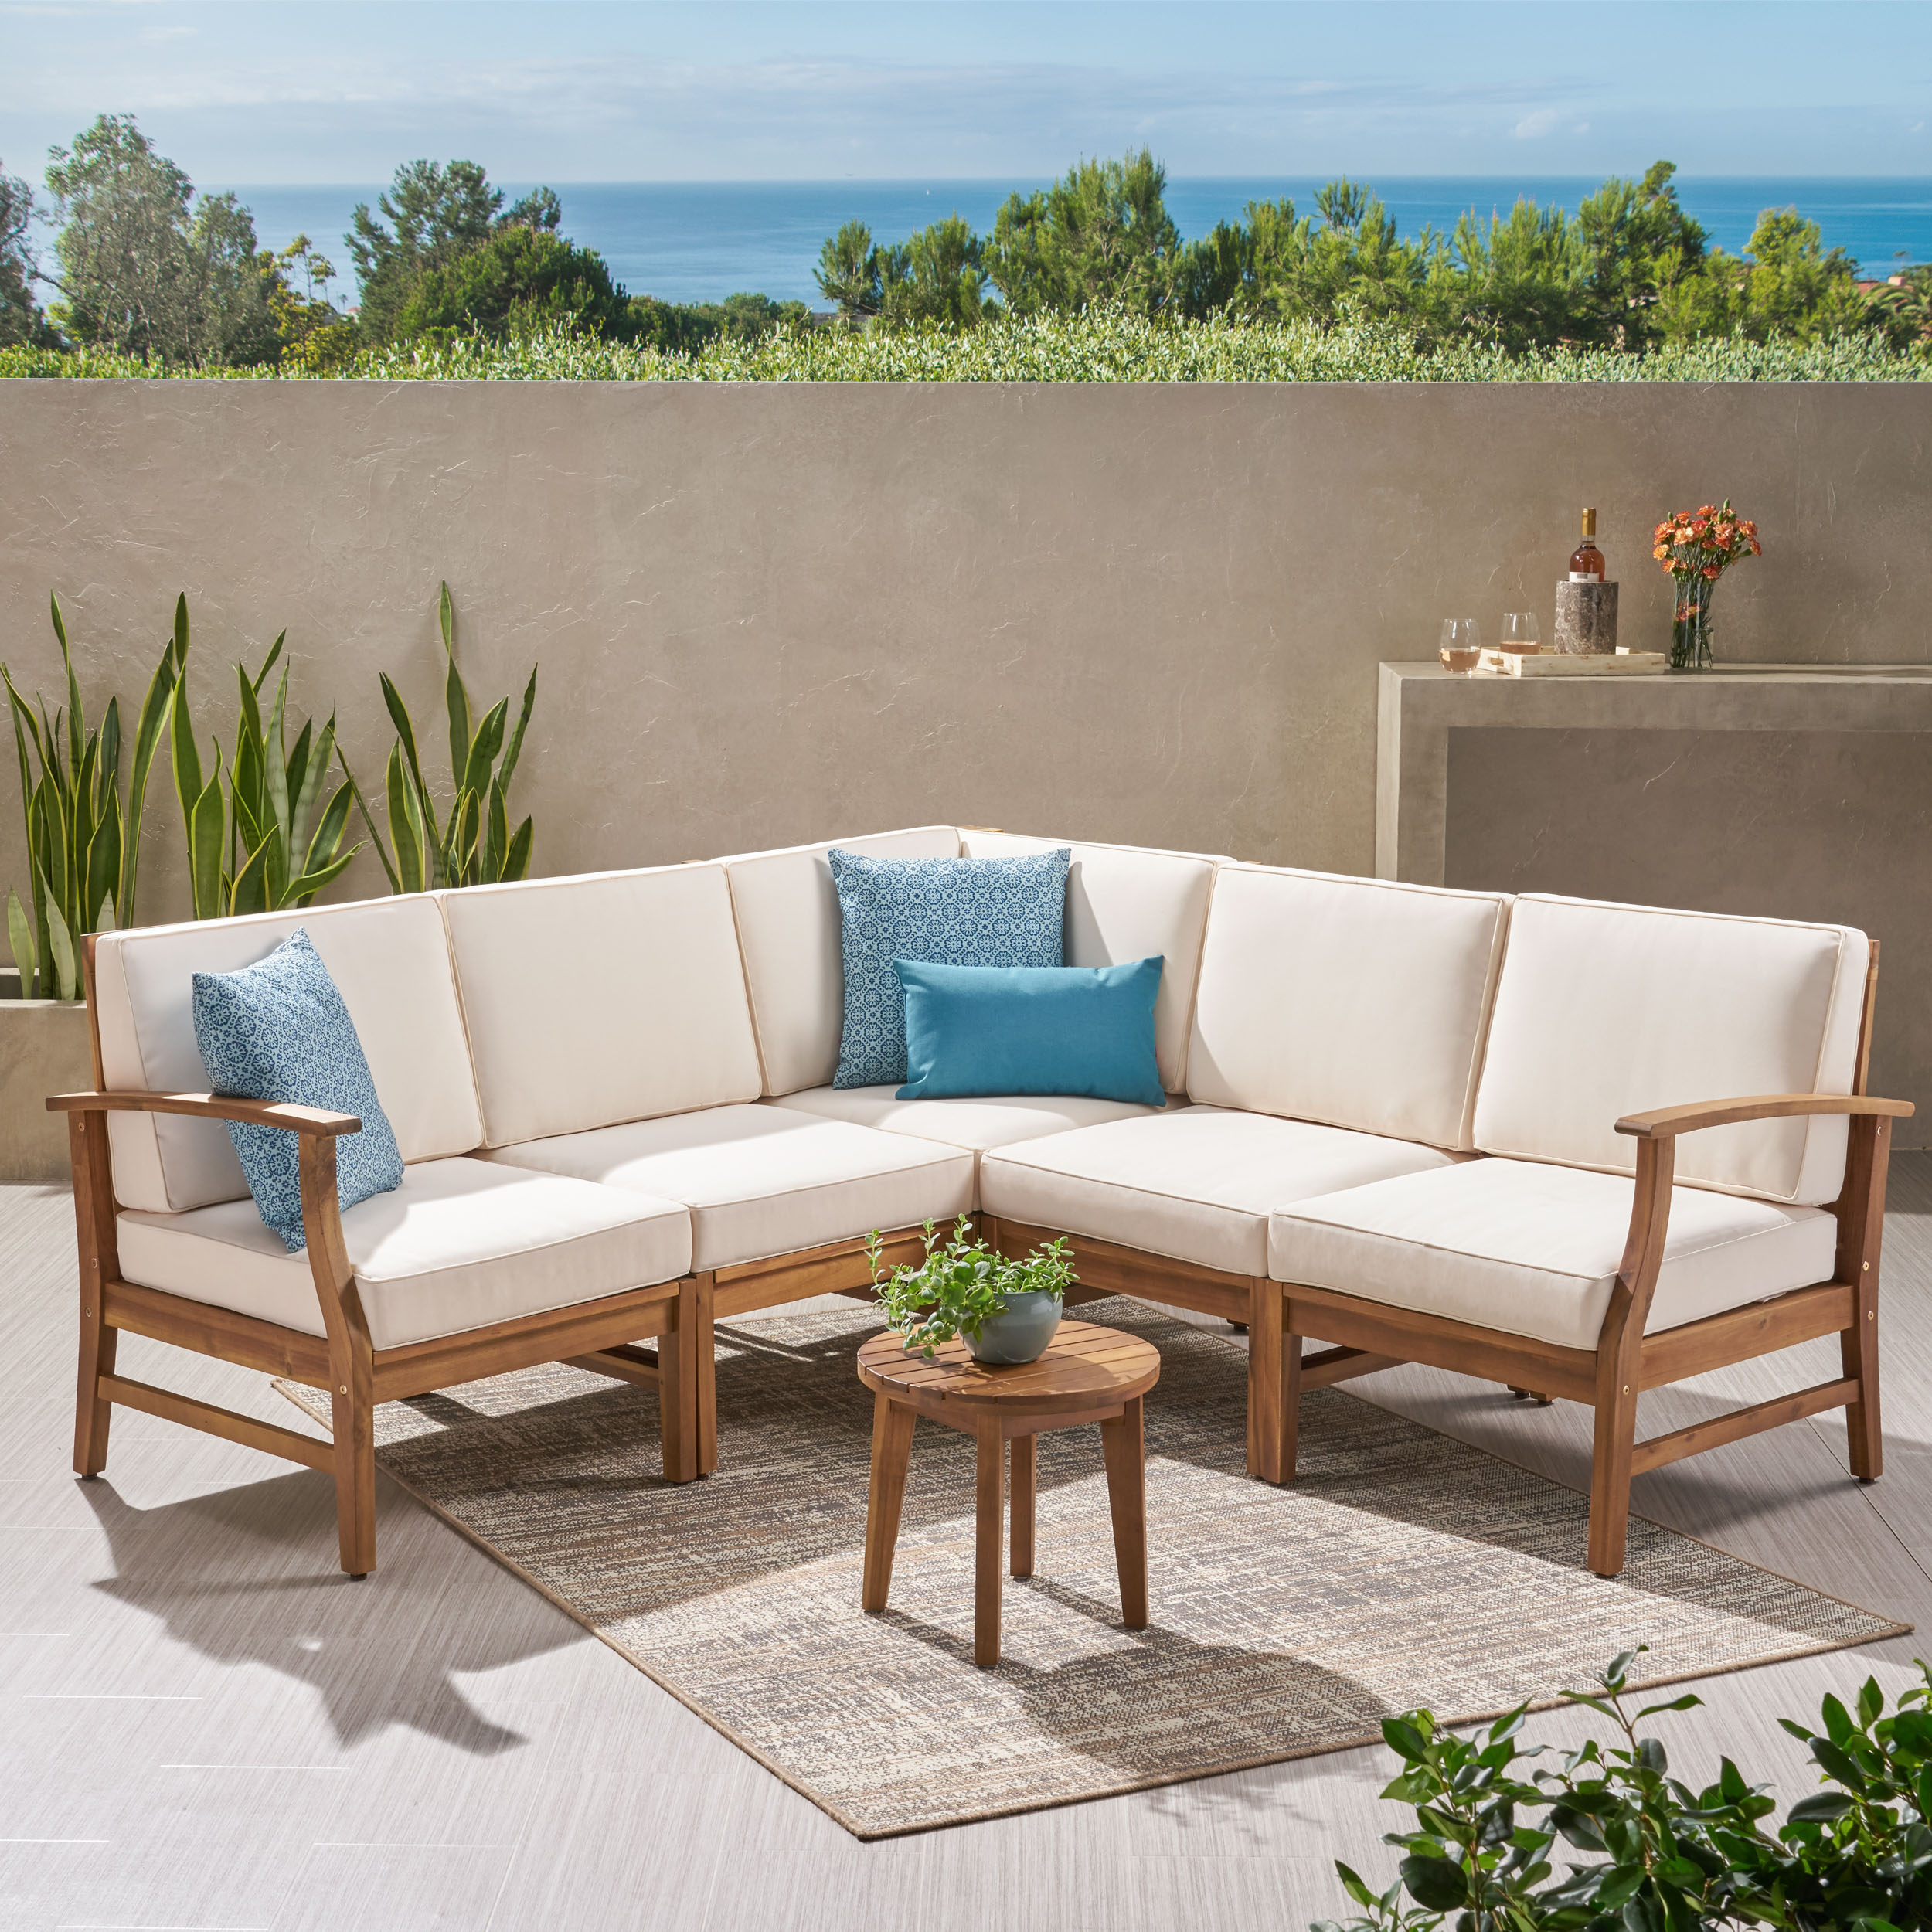 Capri Outdoor 5 Piece Chat Set With Water Resistant Cushions - Cream